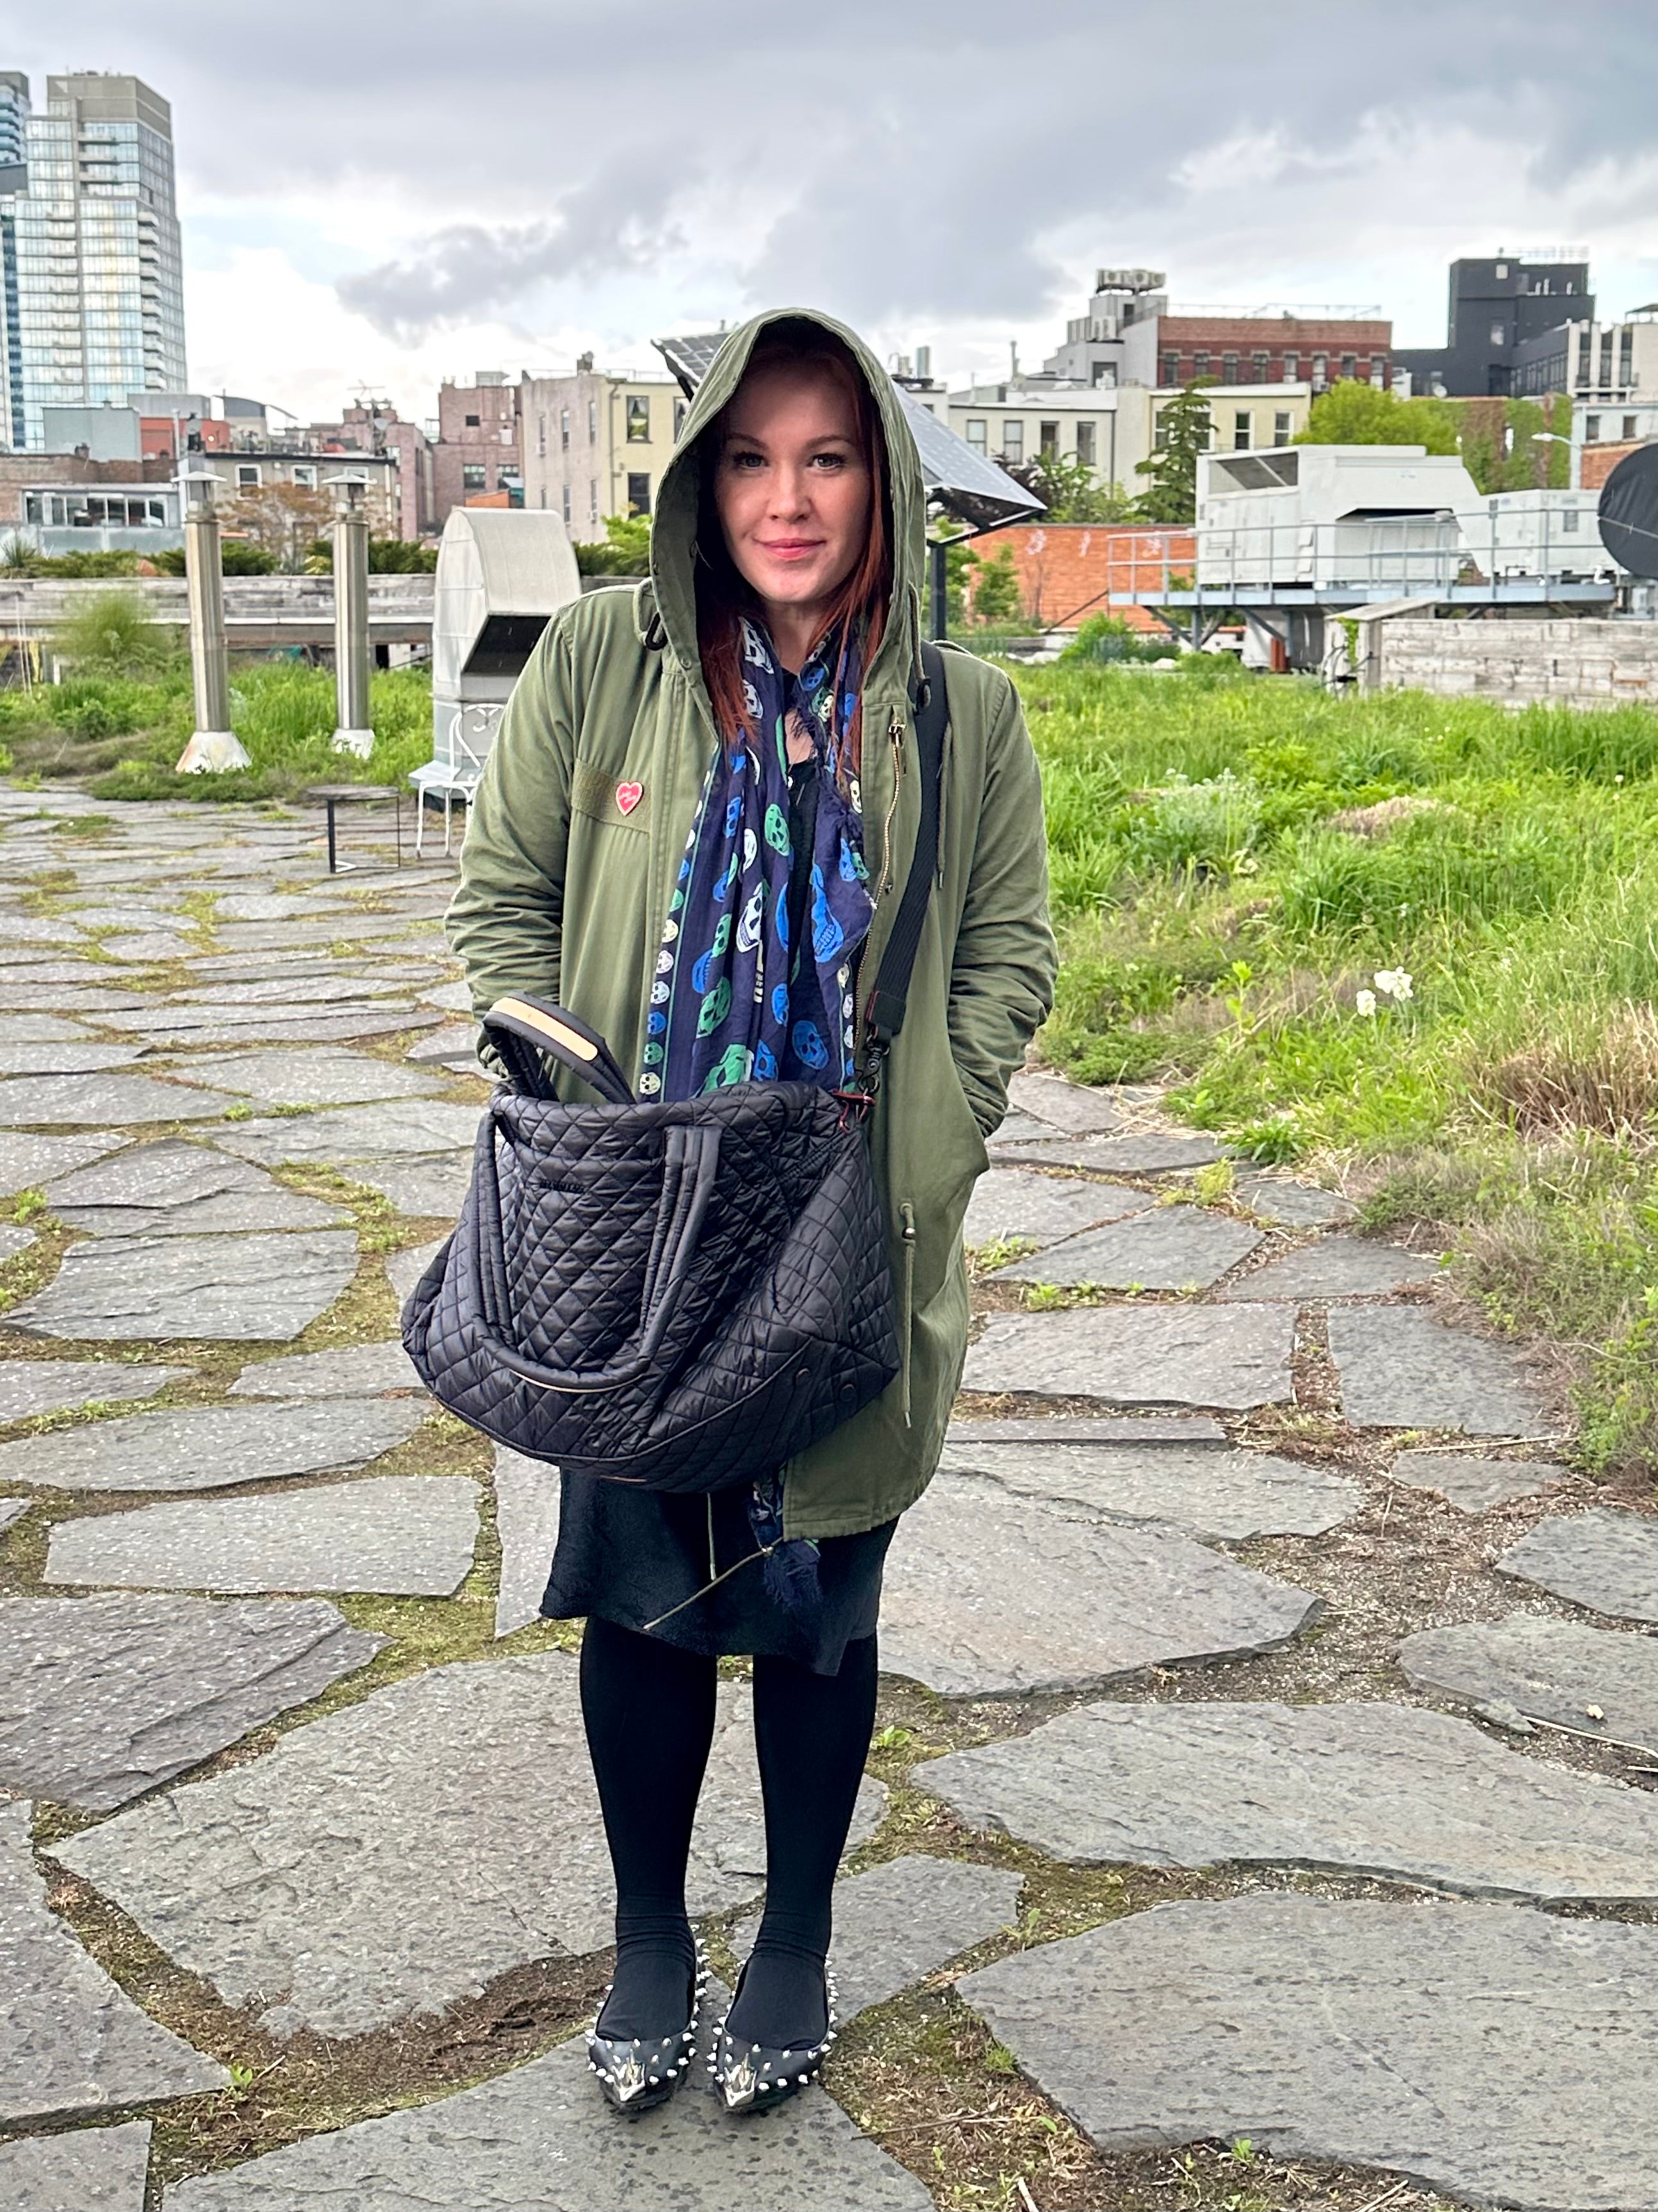 We Review MZ Wallace Bags For Travel